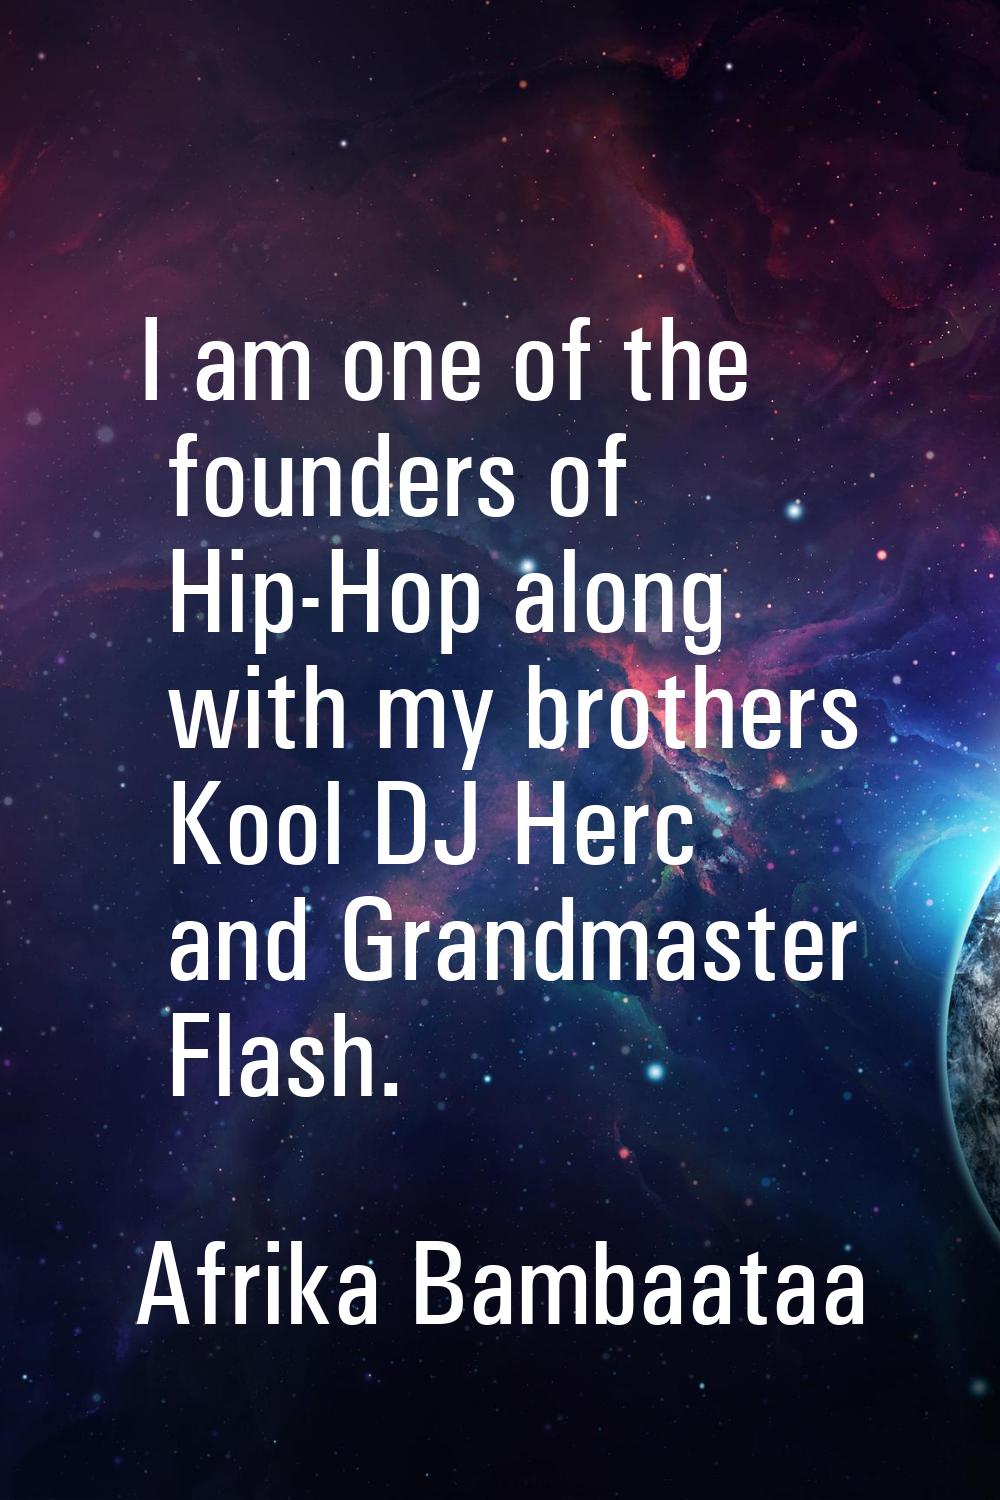 I am one of the founders of Hip-Hop along with my brothers Kool DJ Herc and Grandmaster Flash.